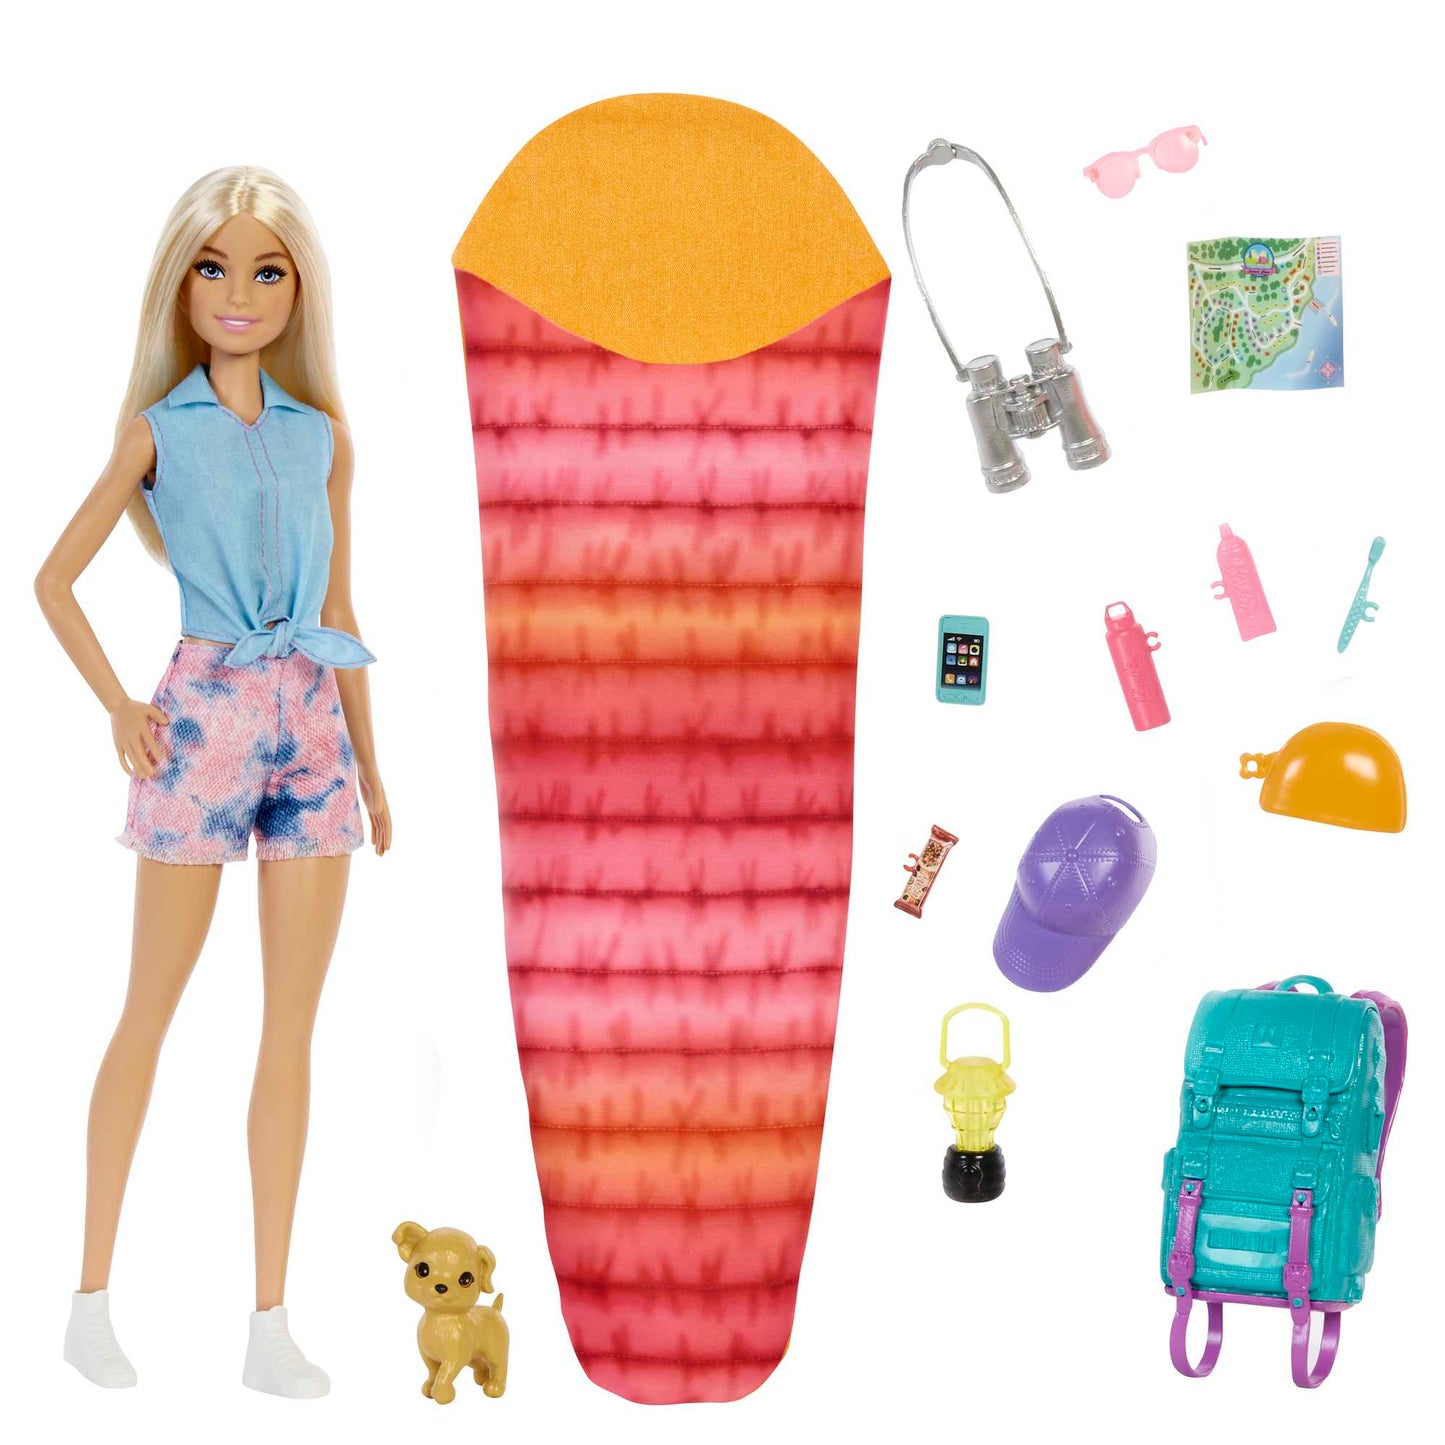 Barbie Doll And Accessories, It Takes Two “Malibu” Camping Doll